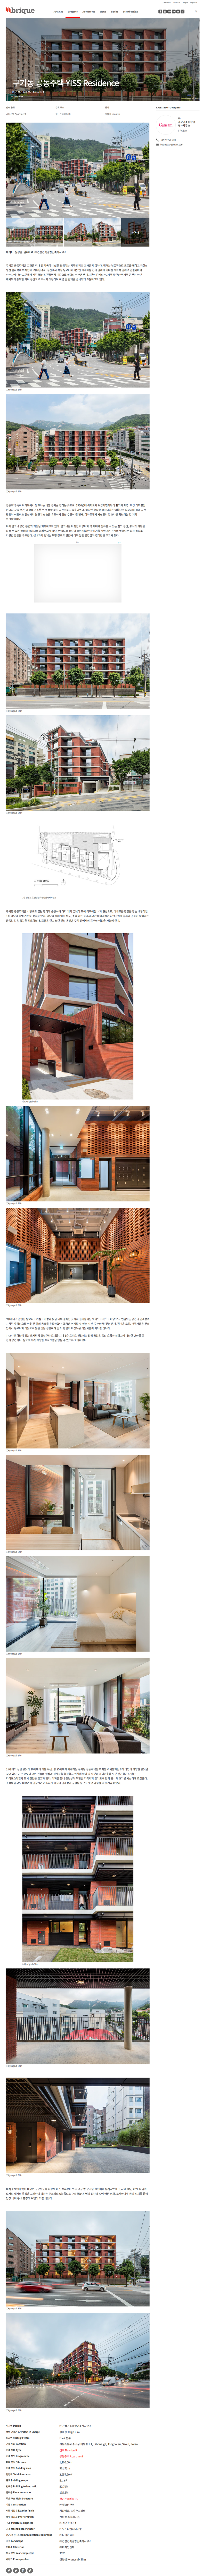 screencapture-magazine-brique-co-project-yiss-residence-2022-04-05-14_28_59.png